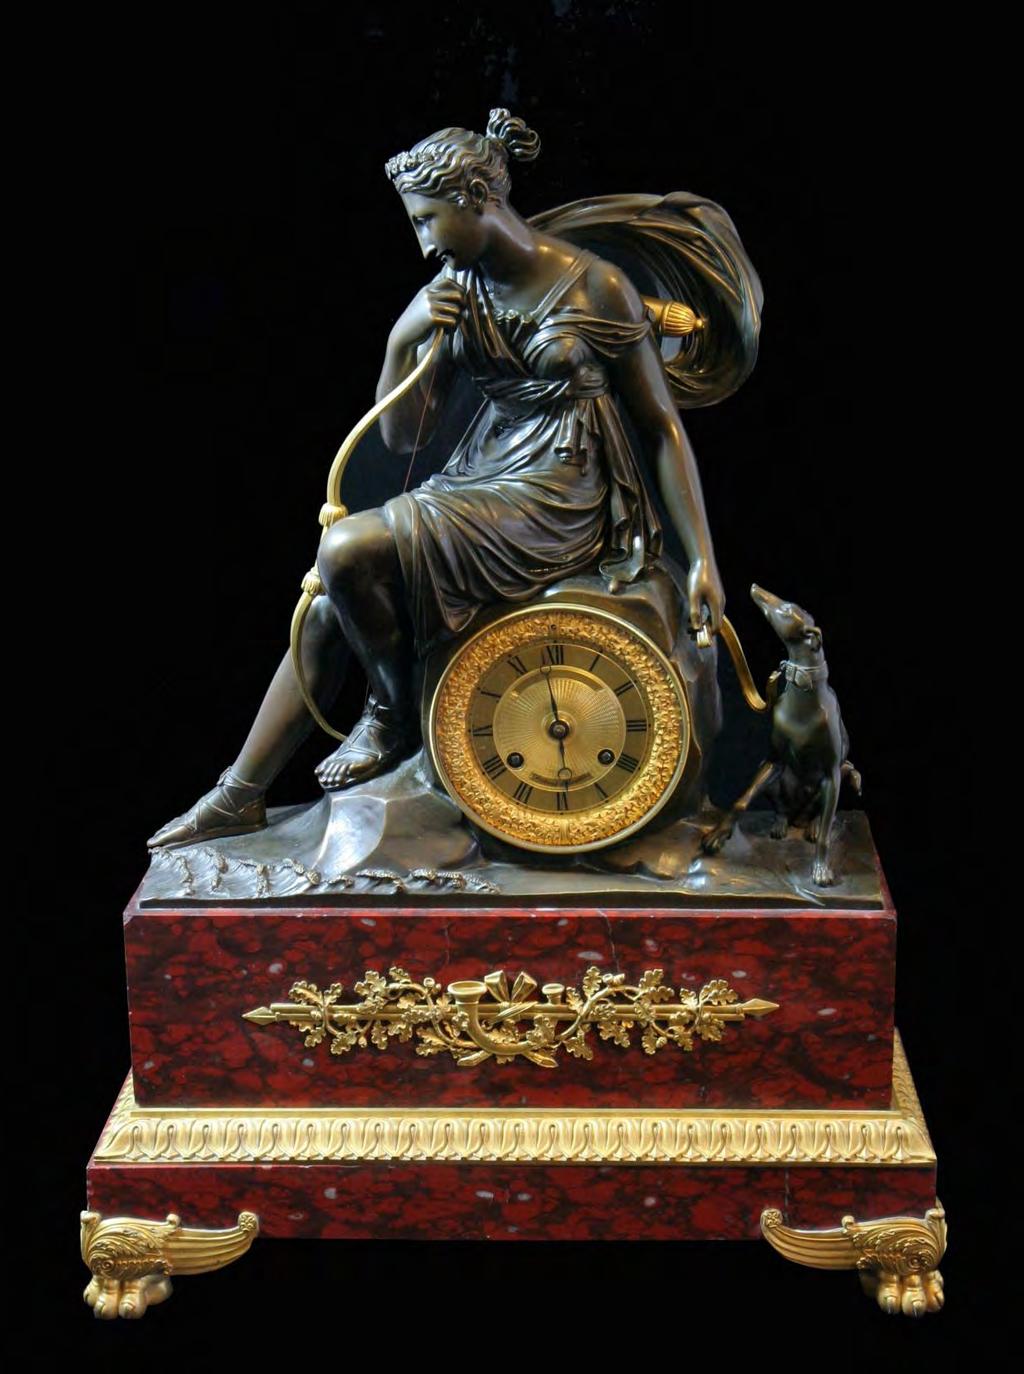 Another Great Find from a Chateau in the South of France, An Astounding Early 19th Century, "French Empire (1804 to 1815)", Gold Plated Bronze, Bronze Patina and Red